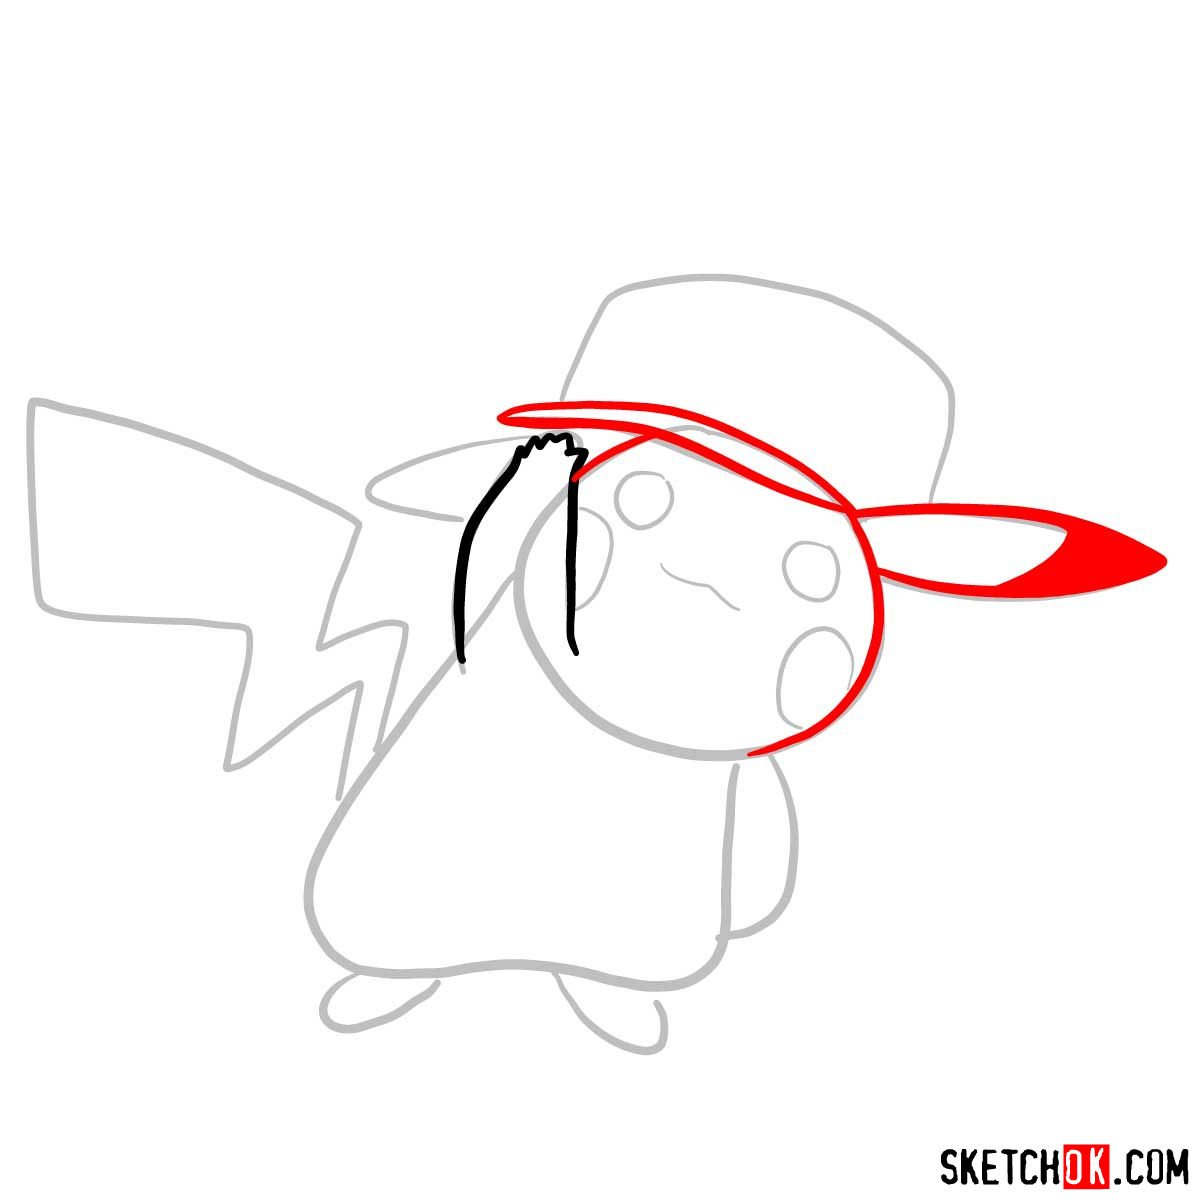 How to draw Pikachu in a cap with pokeball logo - step 04